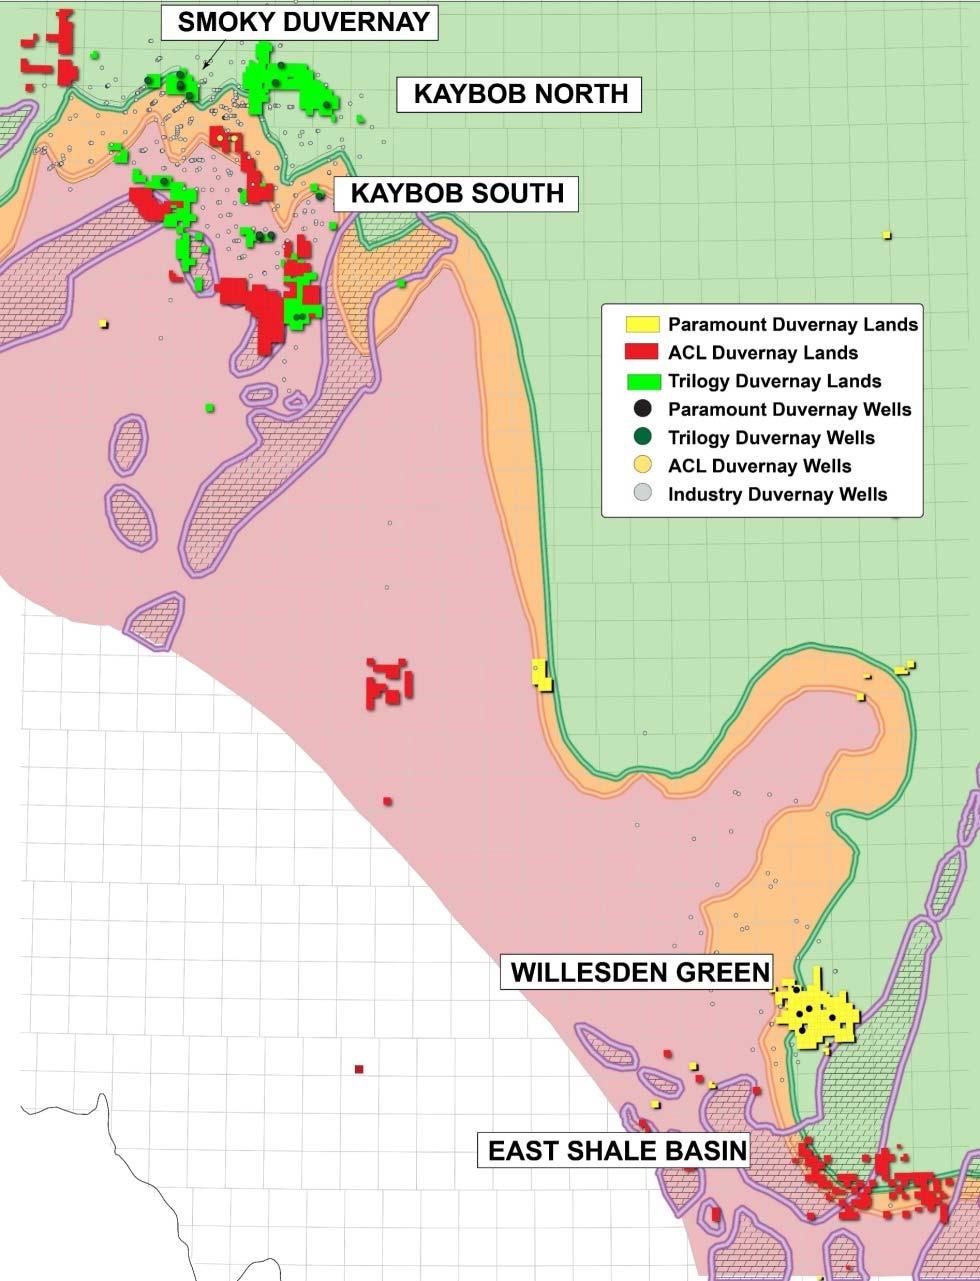 The Duvernay Portfolio (1) Highlights: ~230,000 net acres of Duvernay Plays ~136,000 acres in Kaybob where the Duvernay is being developed commercially by a number of operators Kaybob South Duvernay